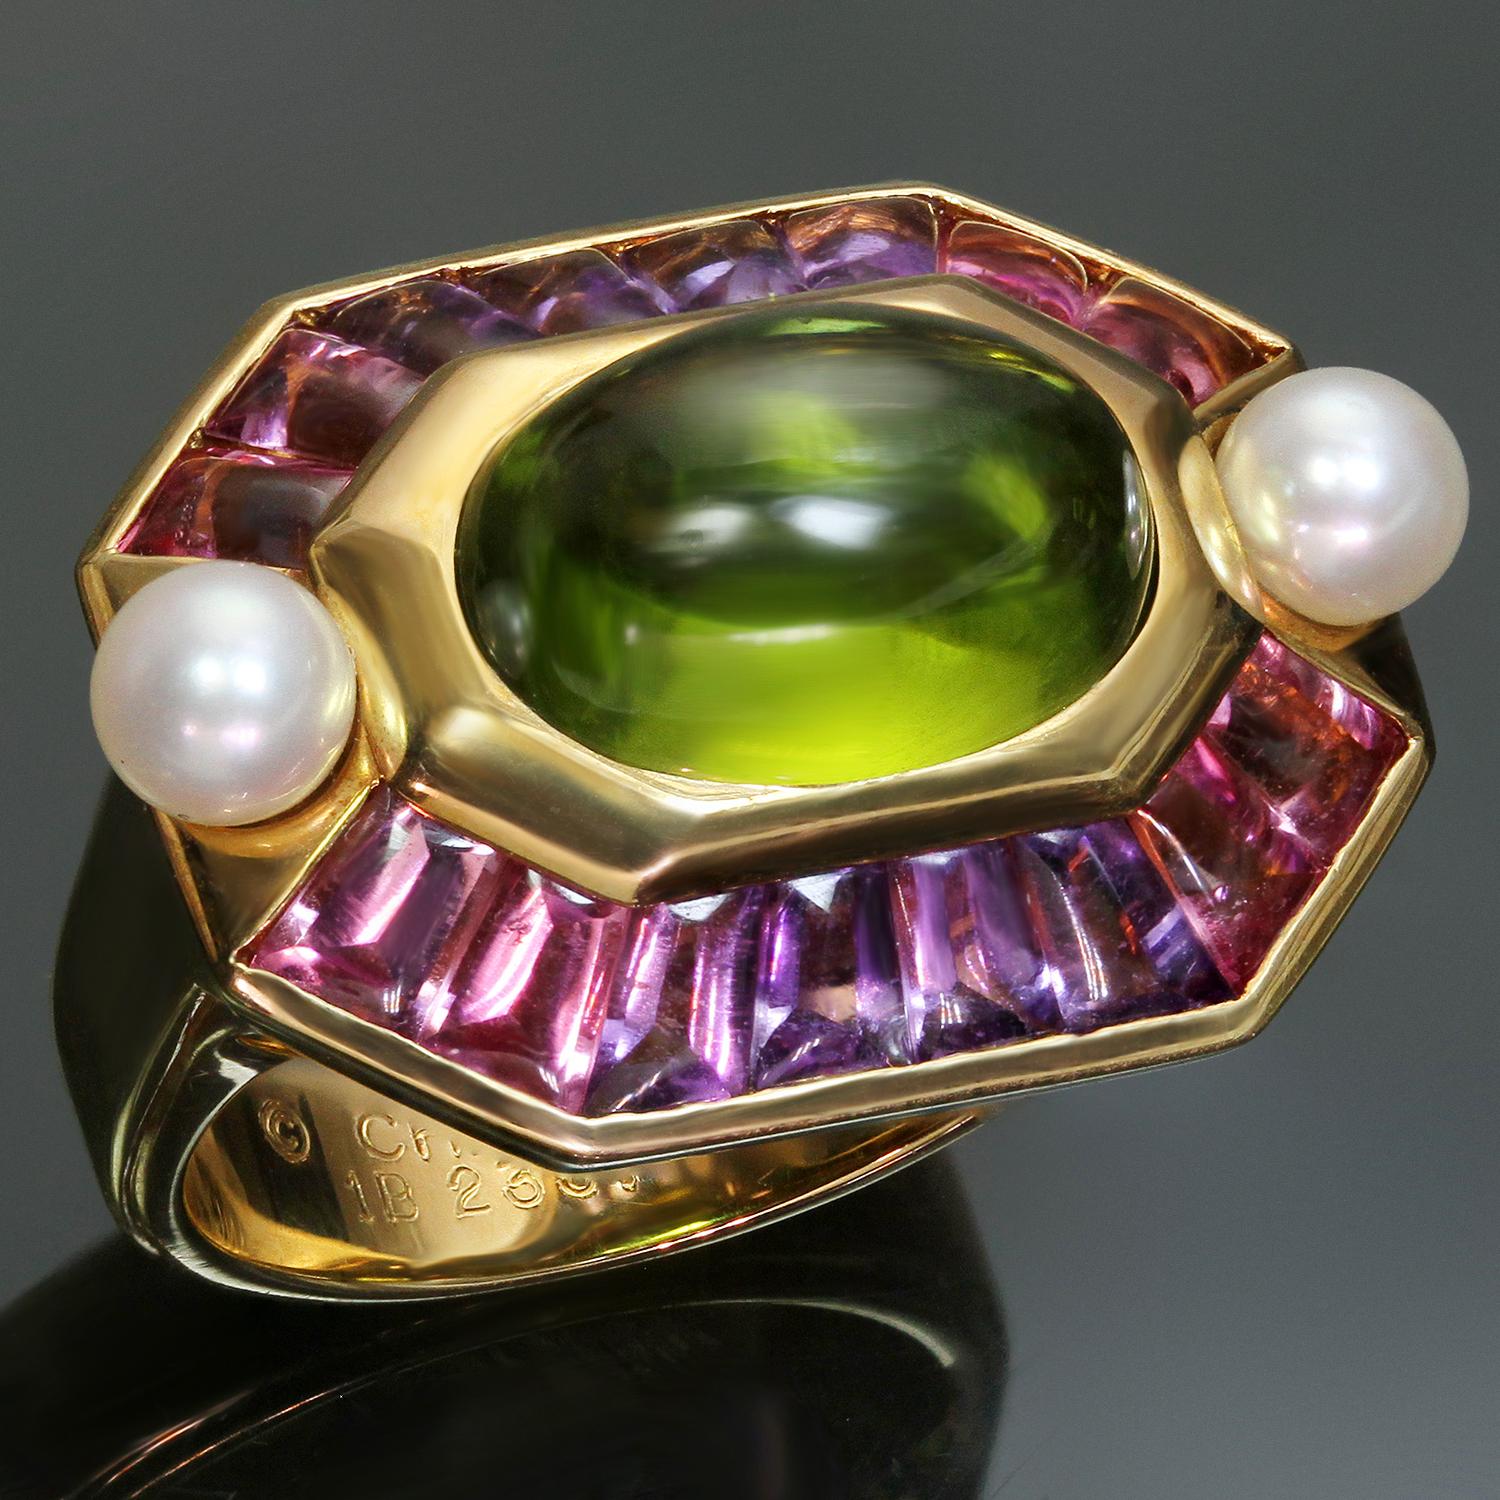 This stunning Chanel ring from the vibrant and opulent Baroque collection is crafted in 18k yellow gold and set with a cabochon oval peridot in the center, surrounded with cabochon baguette amethysts, and completed with a pair of cultured pearls.